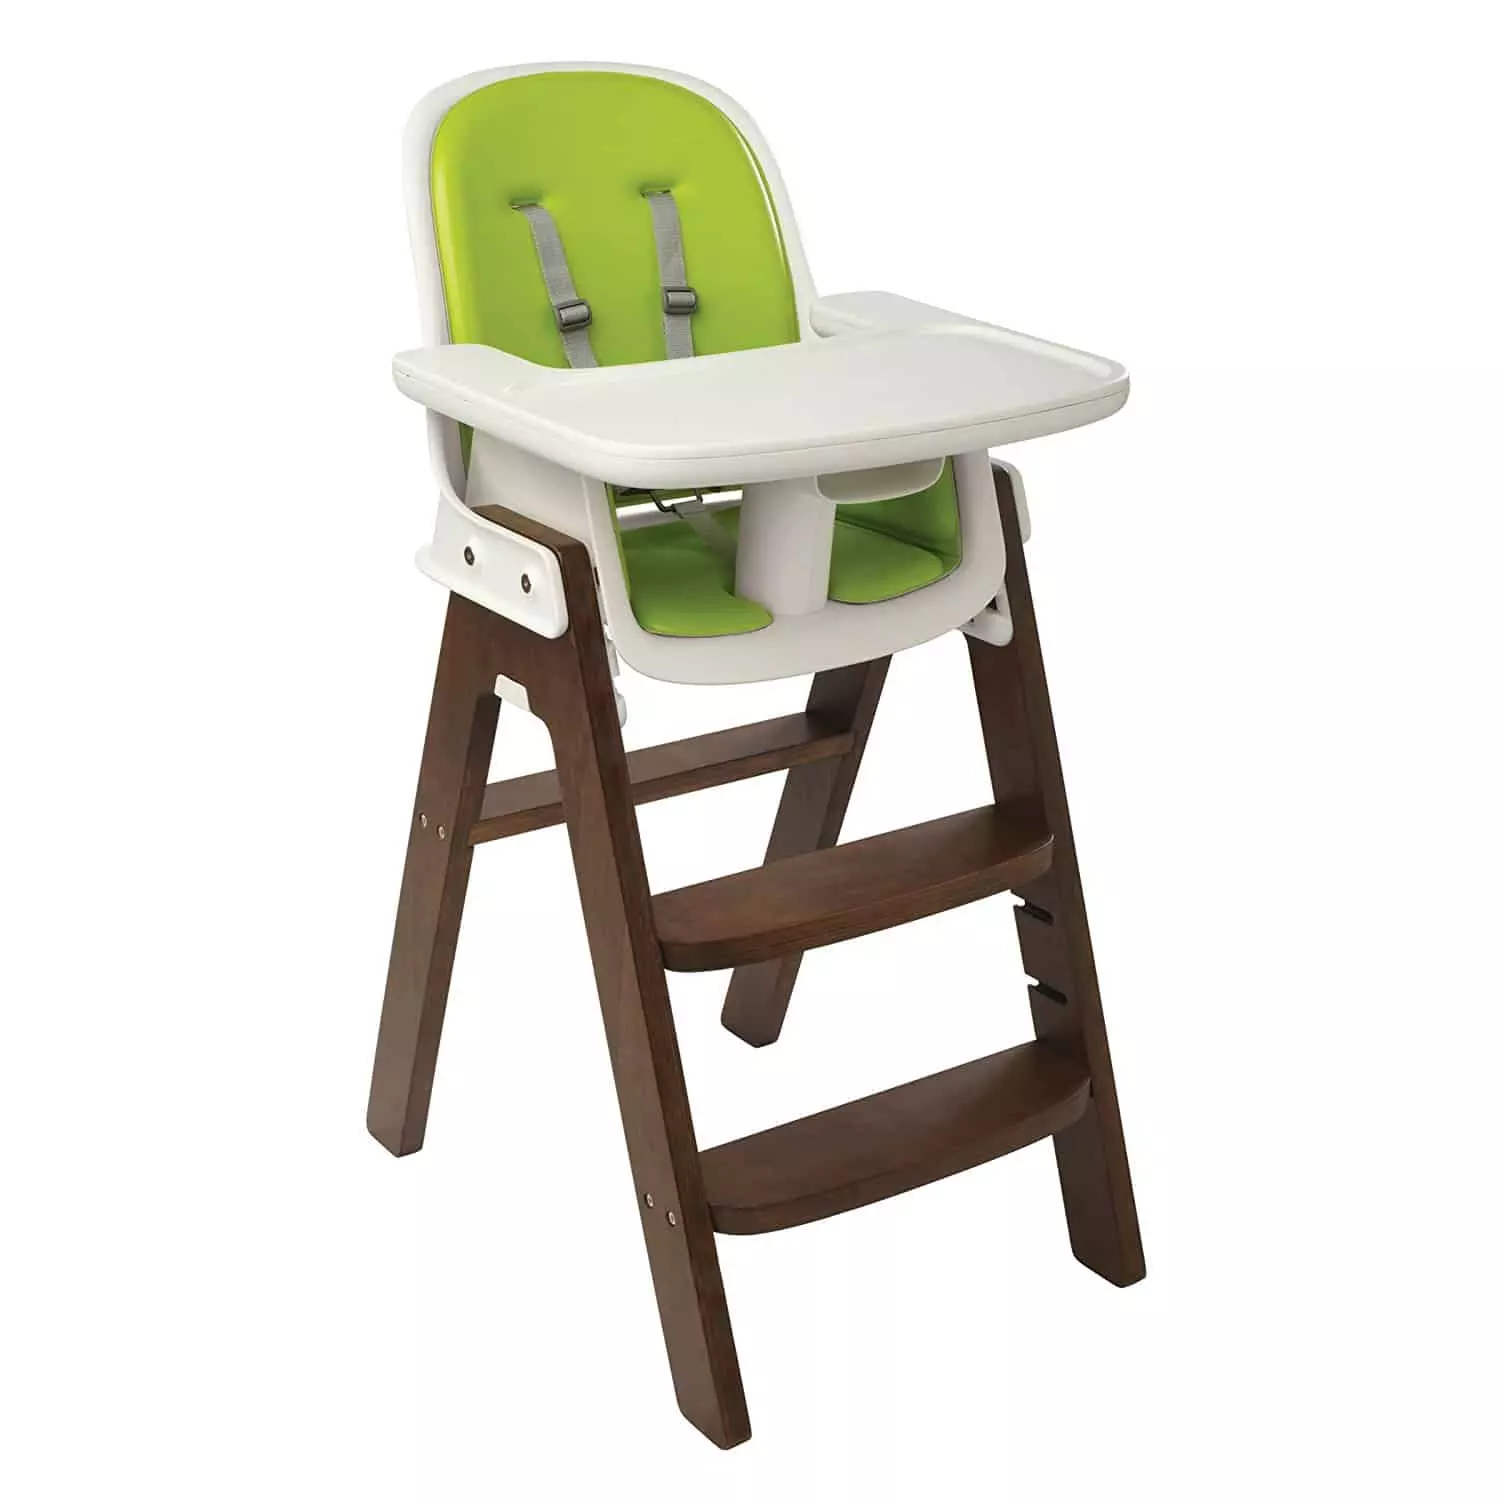 Oxo TOT Sprout high chair